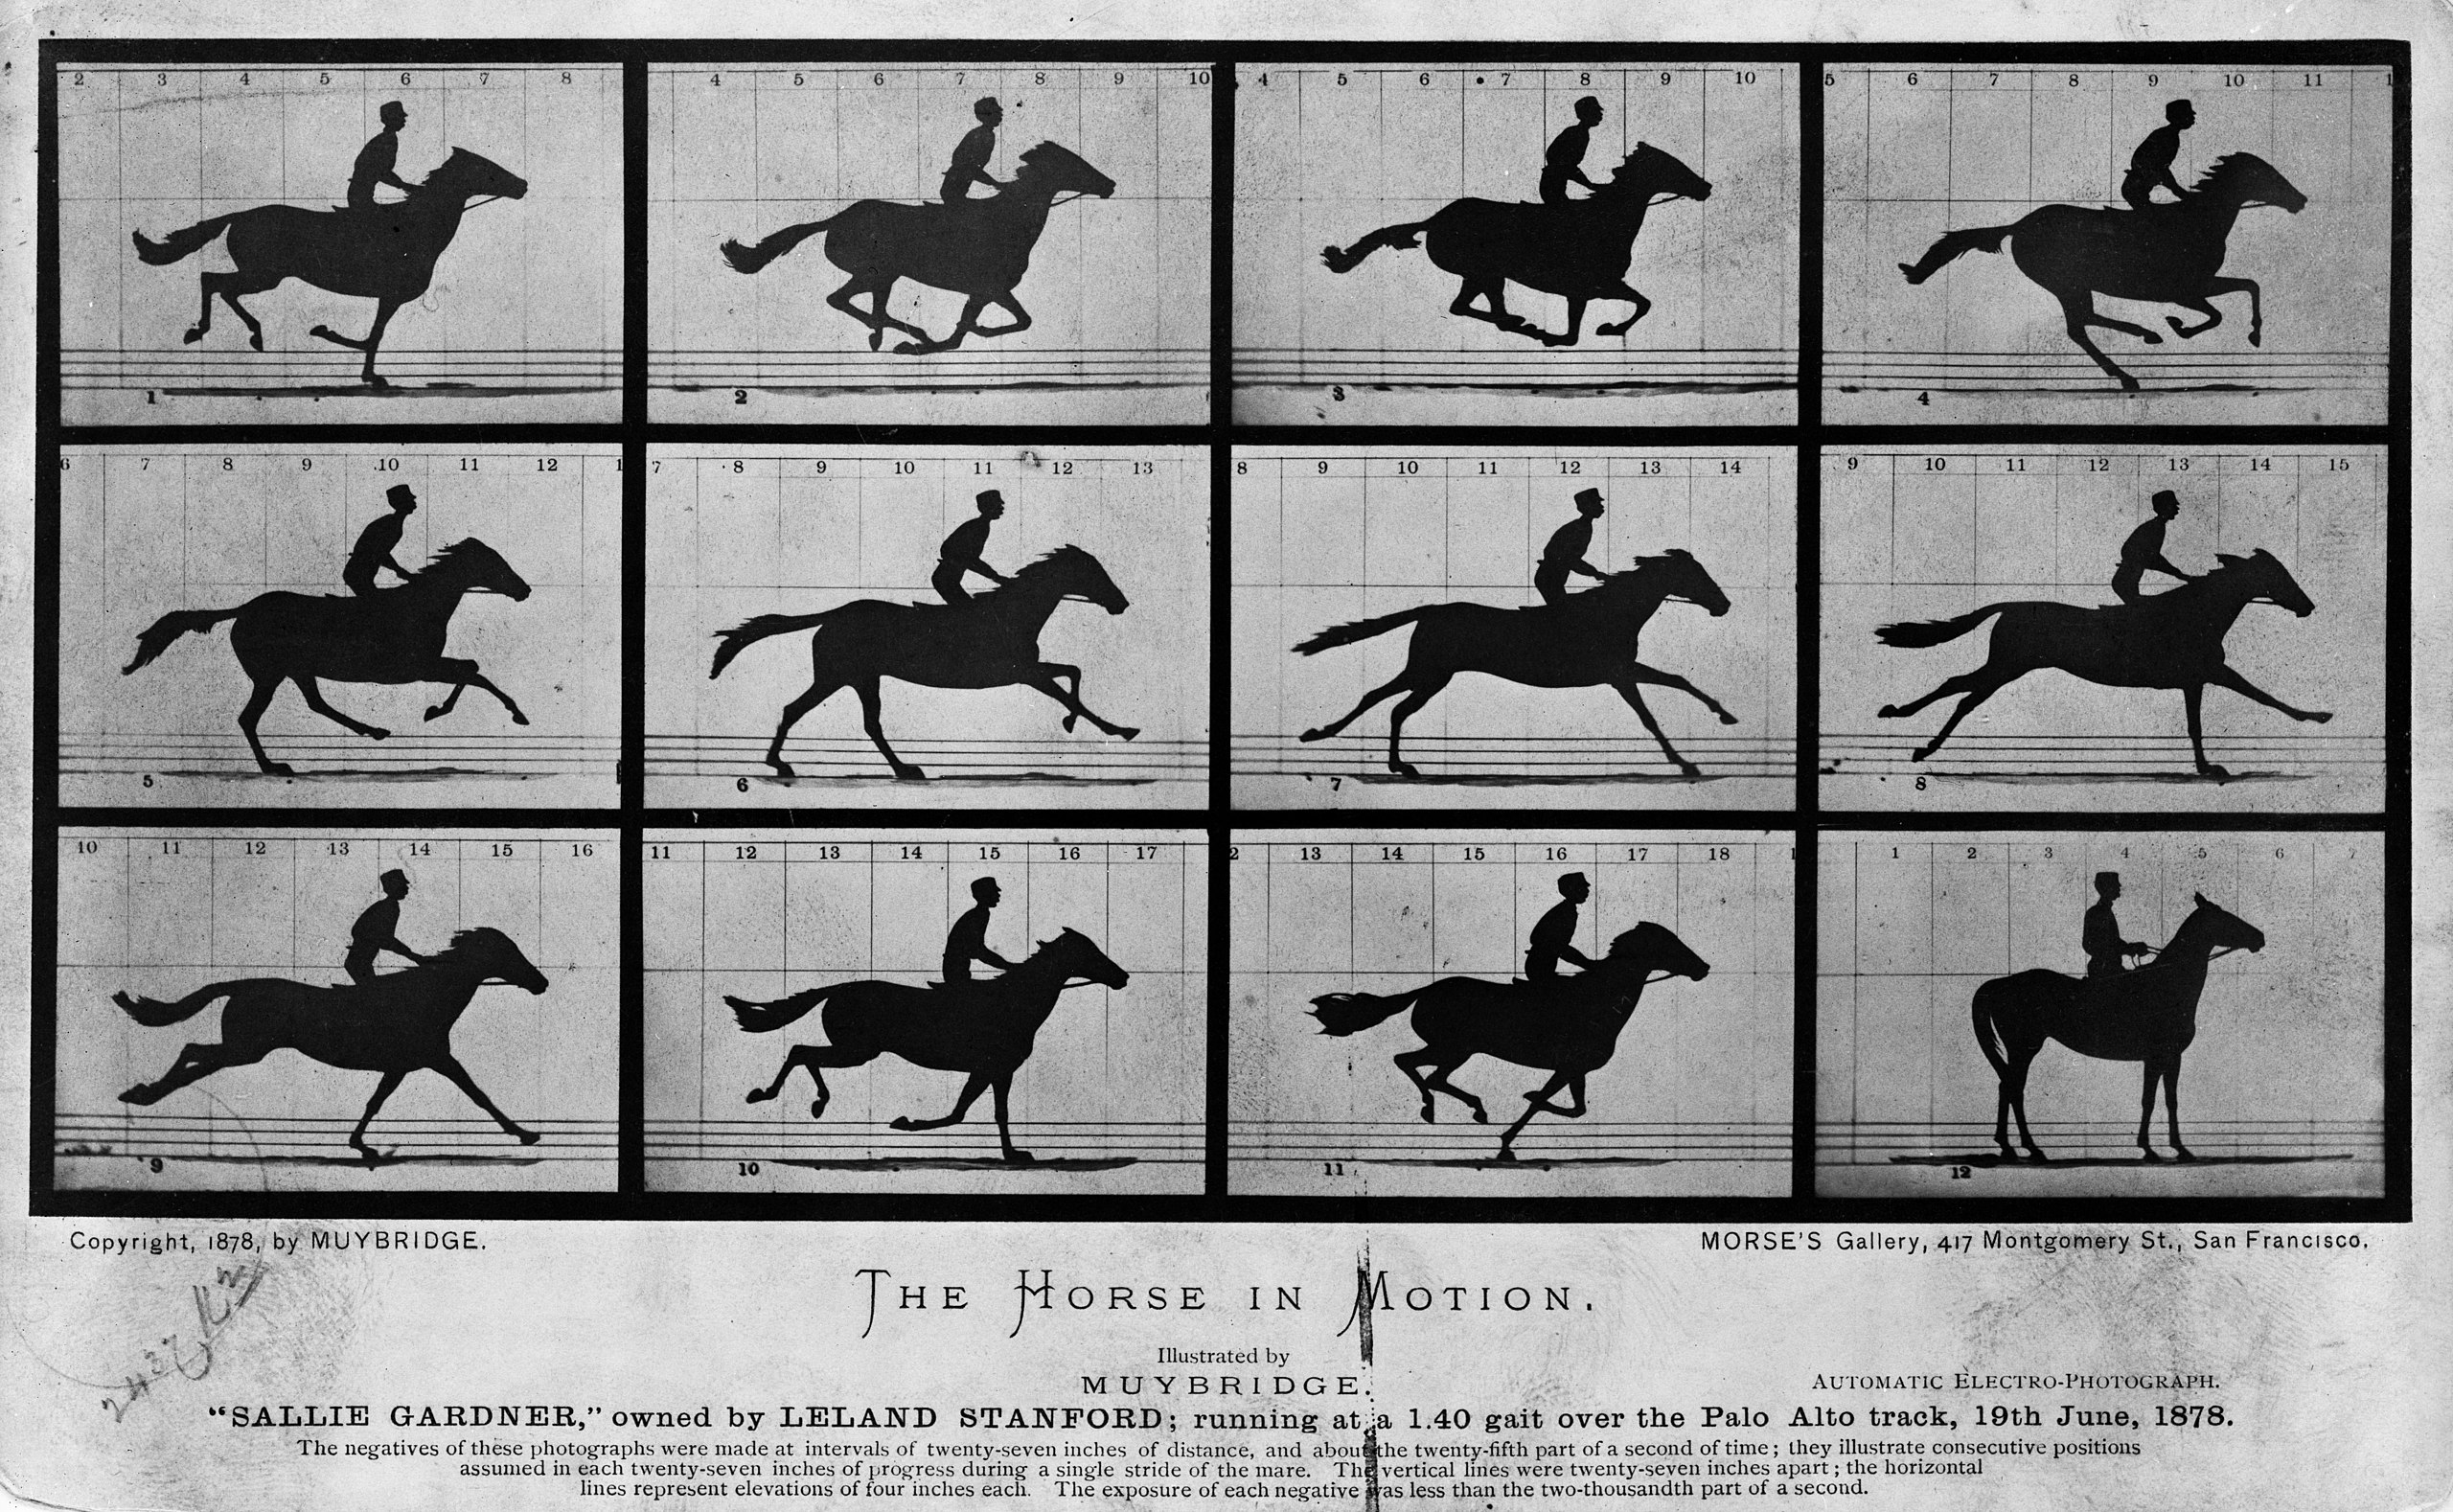 The Full Sequence of the Muybridge 'The Horse In Motion'